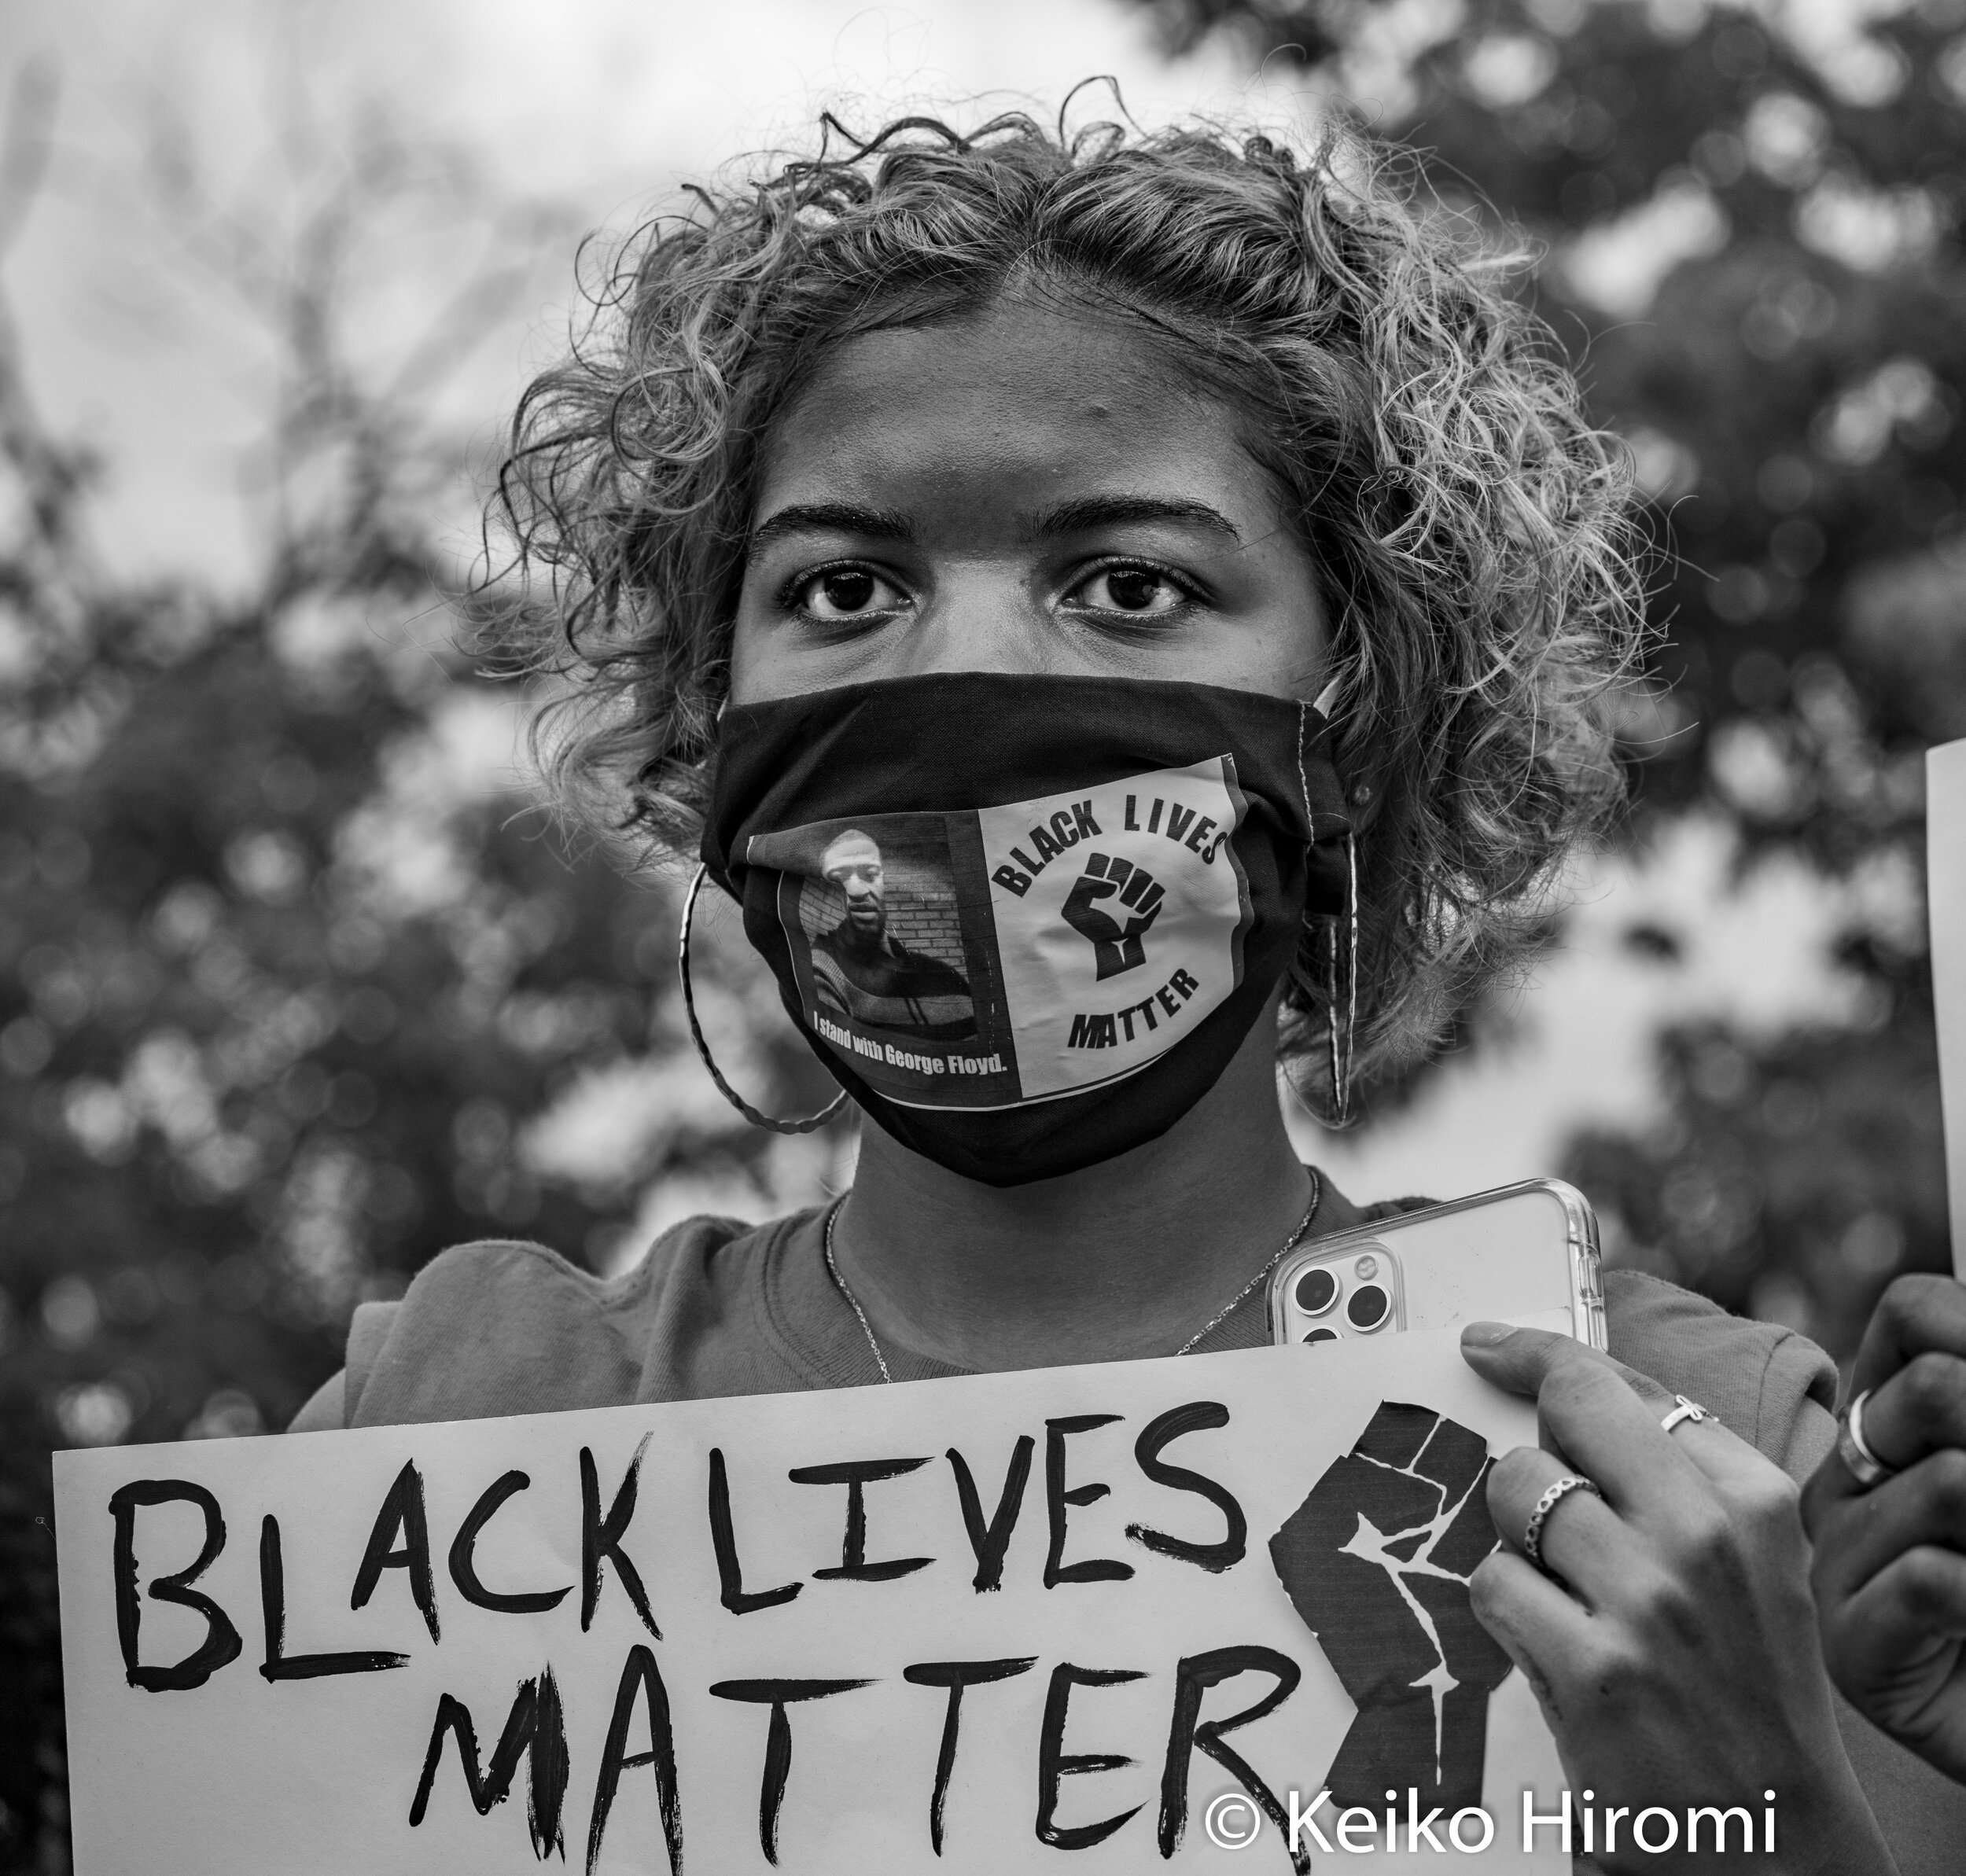  May 29, 2020, Boston, Massachusetts, USA: A protester holds a sign "Black Lives Matter" during a rally in response to deaths of George Floyd and against police brutality and racism at Peter's park in Boston, Massachusetts. 